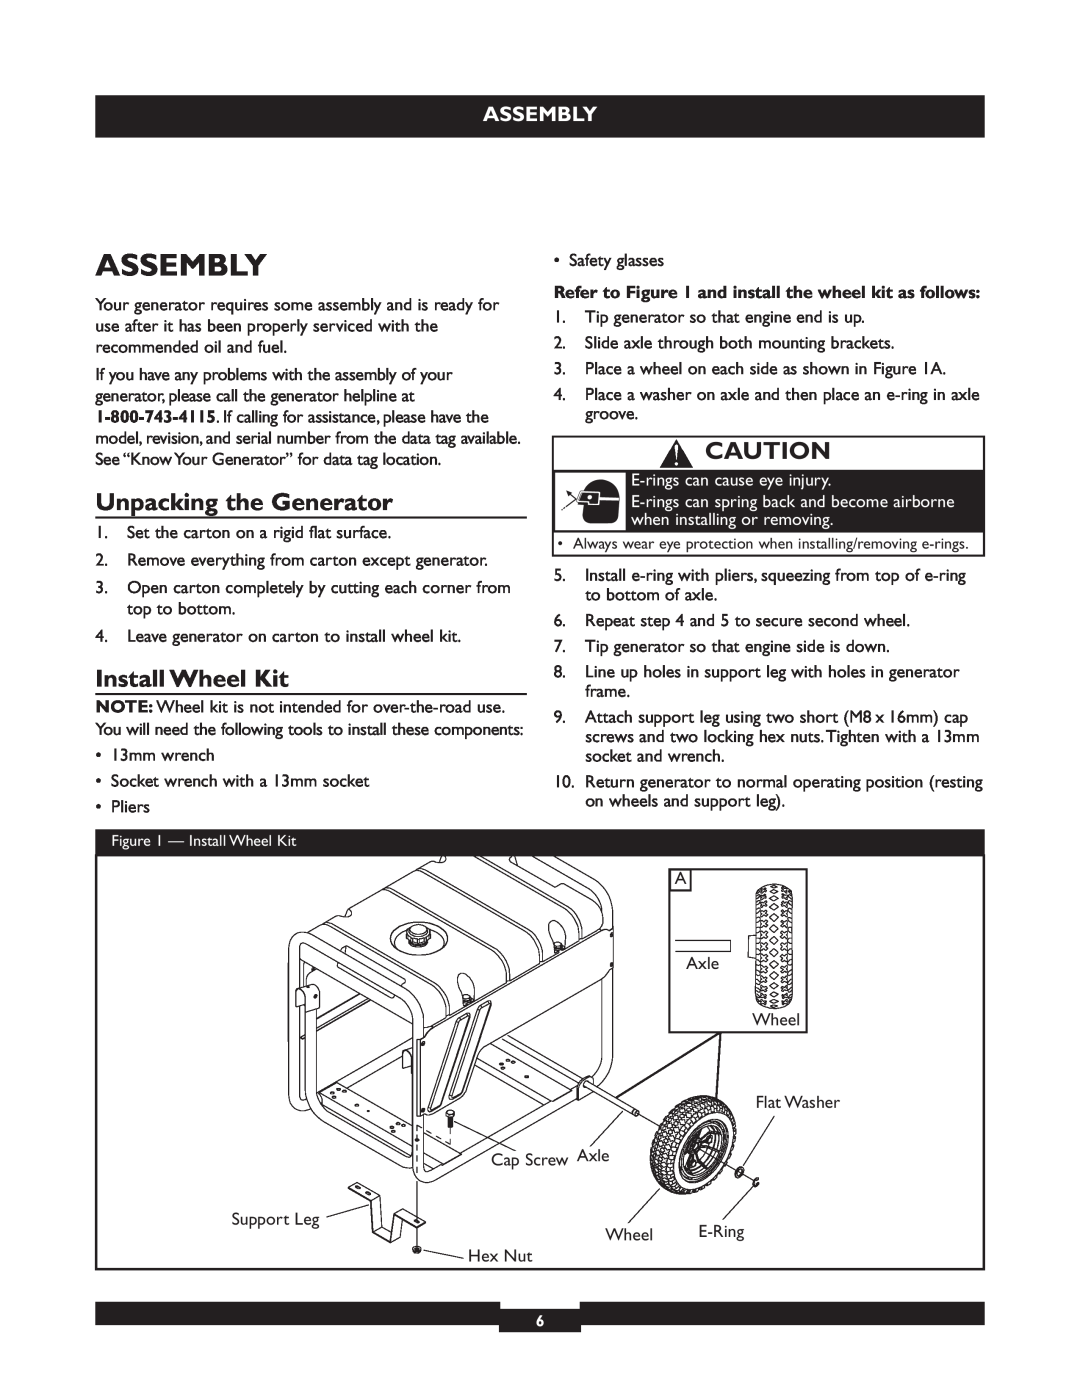 Briggs & Stratton 30219 manual Assembly, Unpacking the Generator, Install Wheel Kit, E-rings can cause eye injury 